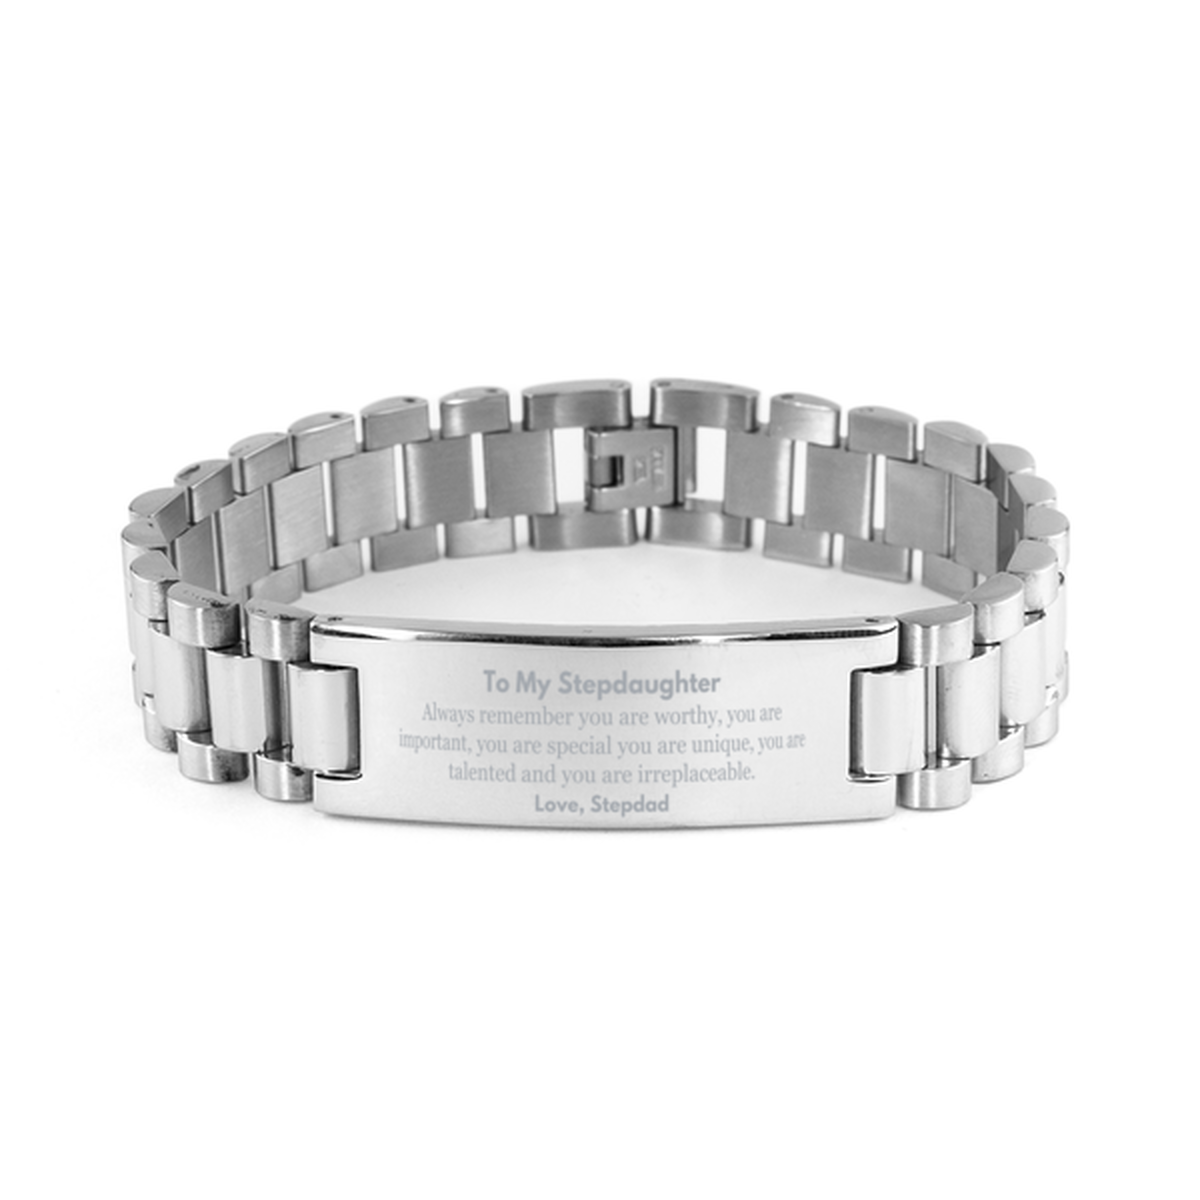 Stepdaughter Birthday Gifts from Stepdad, Inspirational Ladder Stainless Steel Bracelet for Stepdaughter Christmas Graduation Gifts for Stepdaughter Always remember you are worthy, you are important. Love, Stepdad